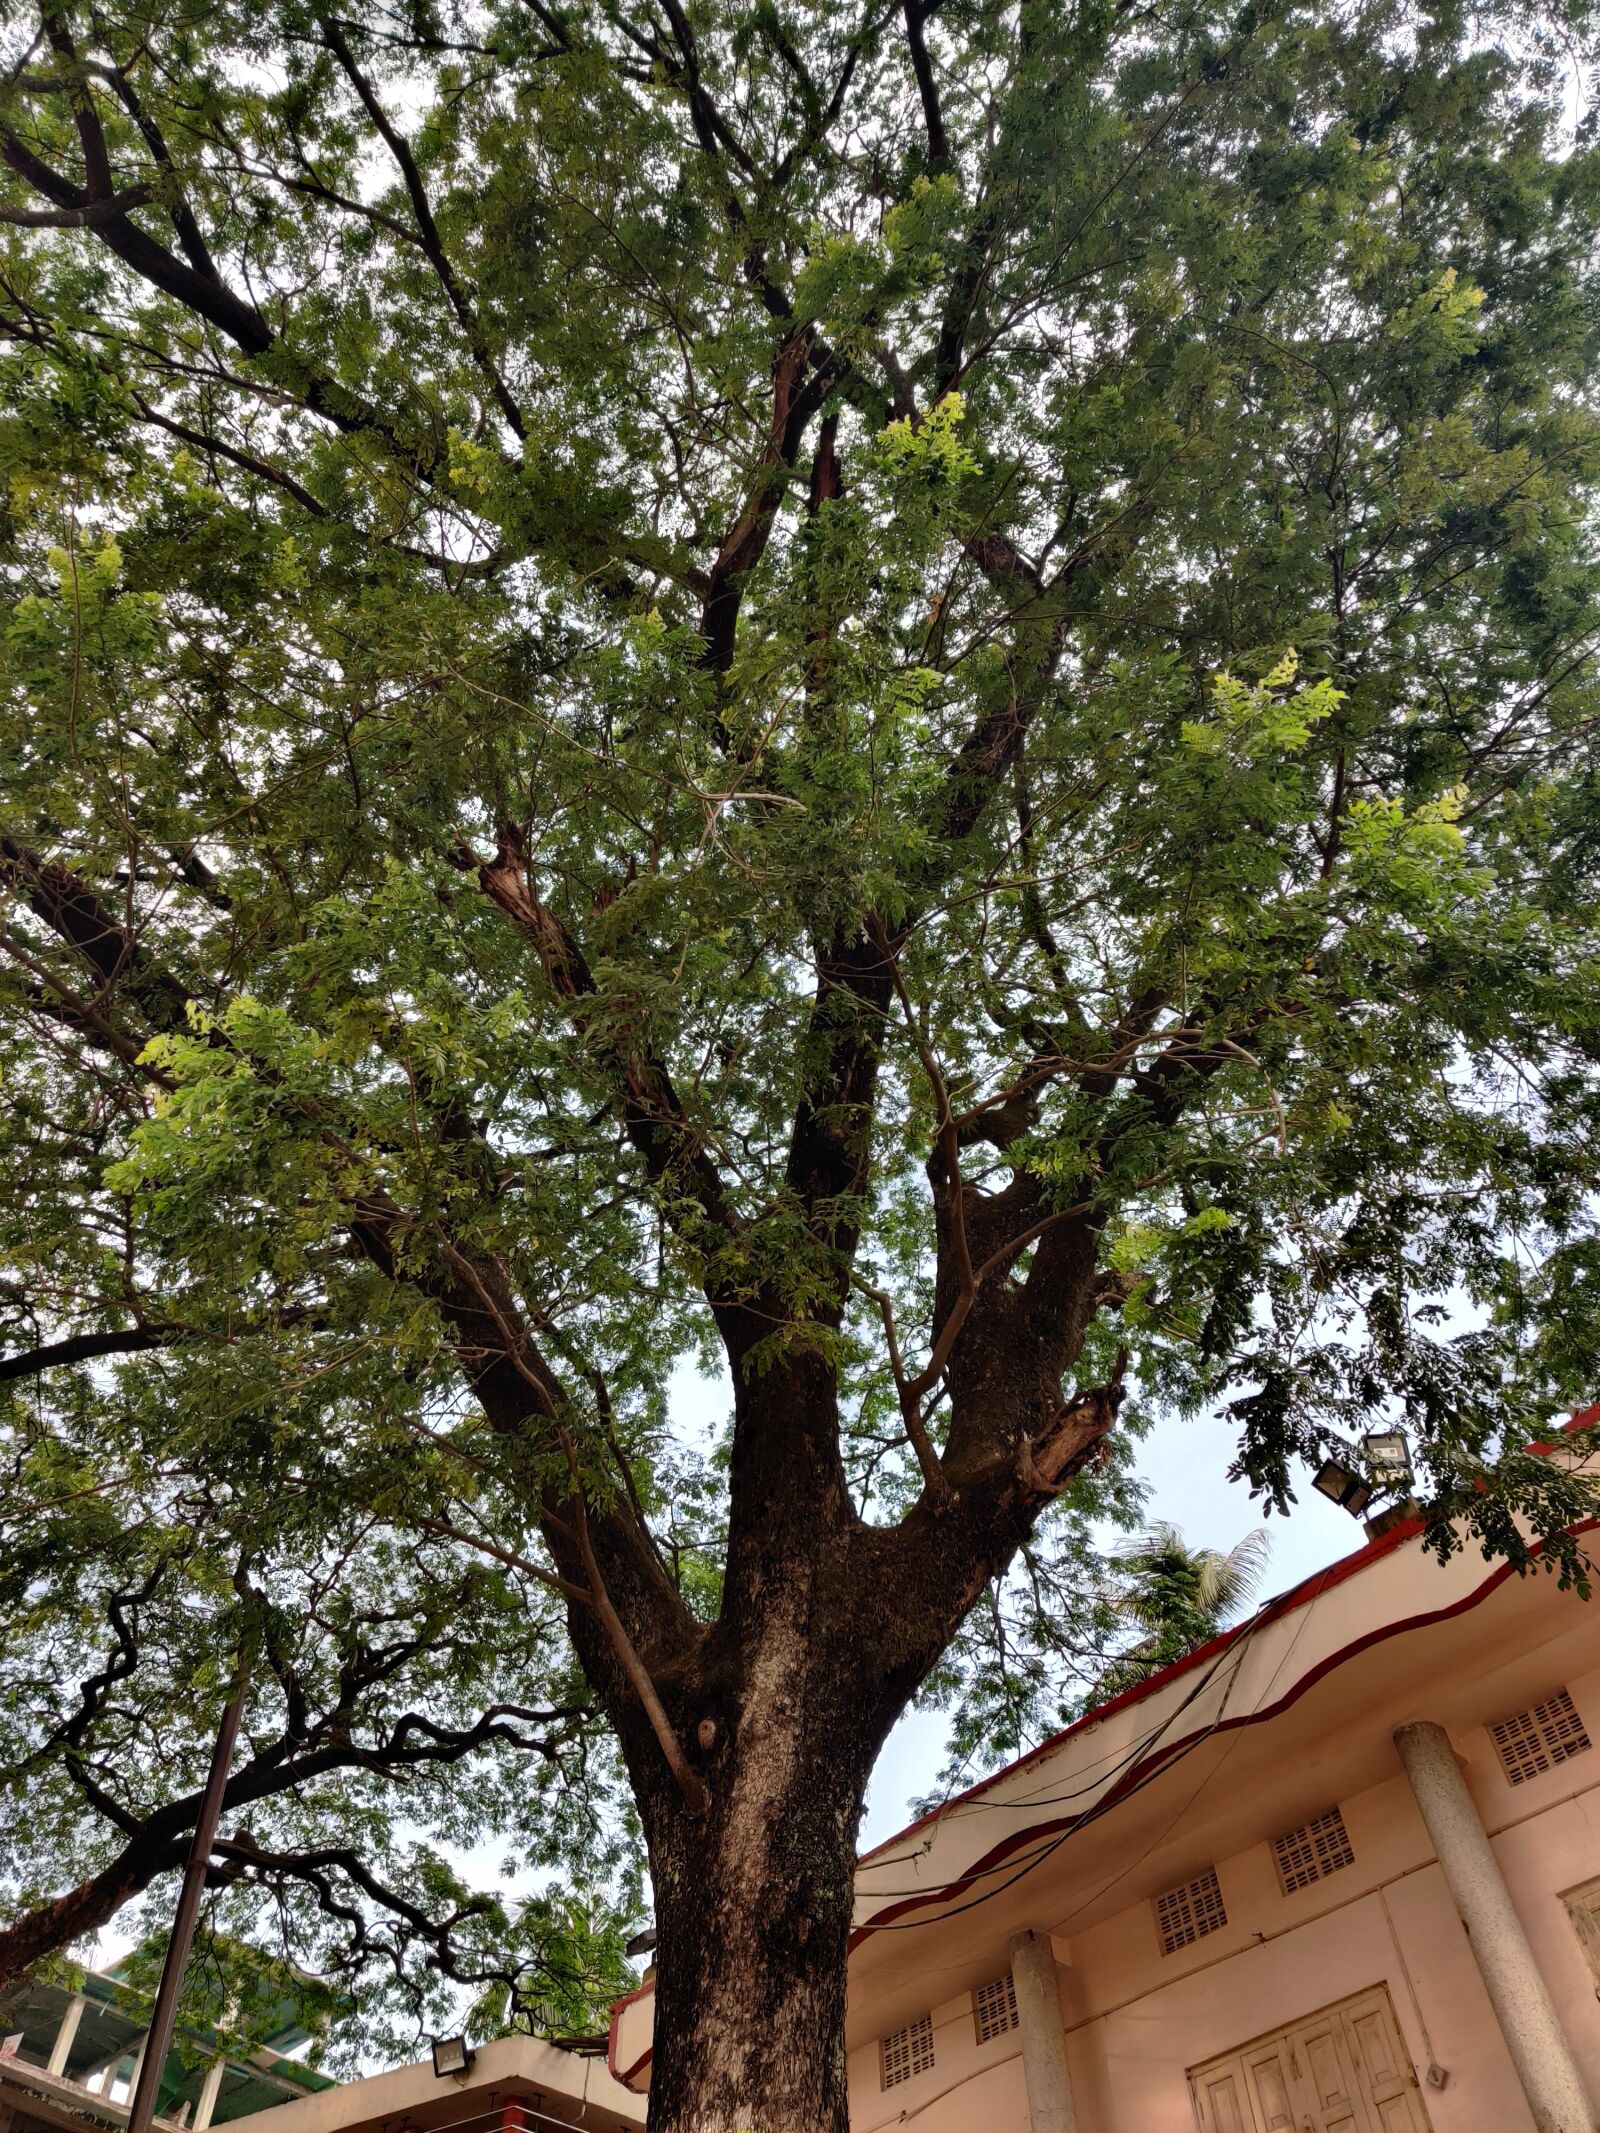 OnePlus HD1901 sample photo. Tree, temples, vacation photography